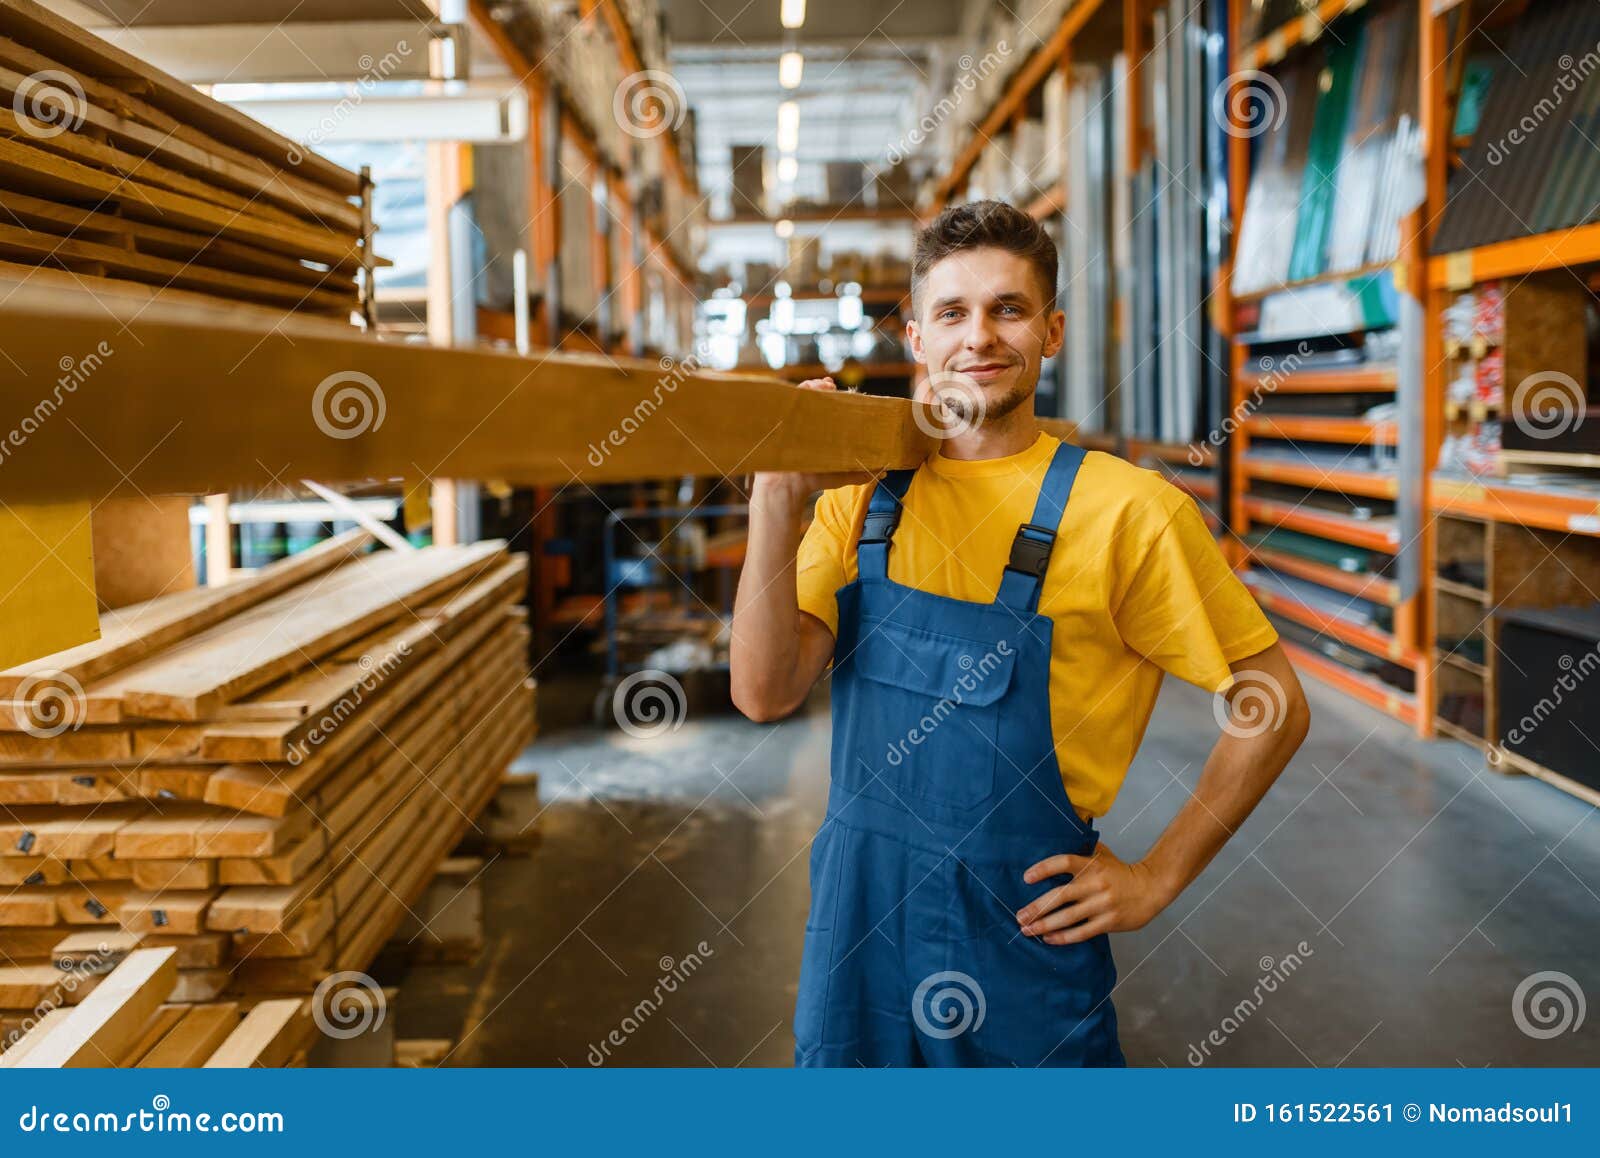 male builder holds wooden boards in hardware store